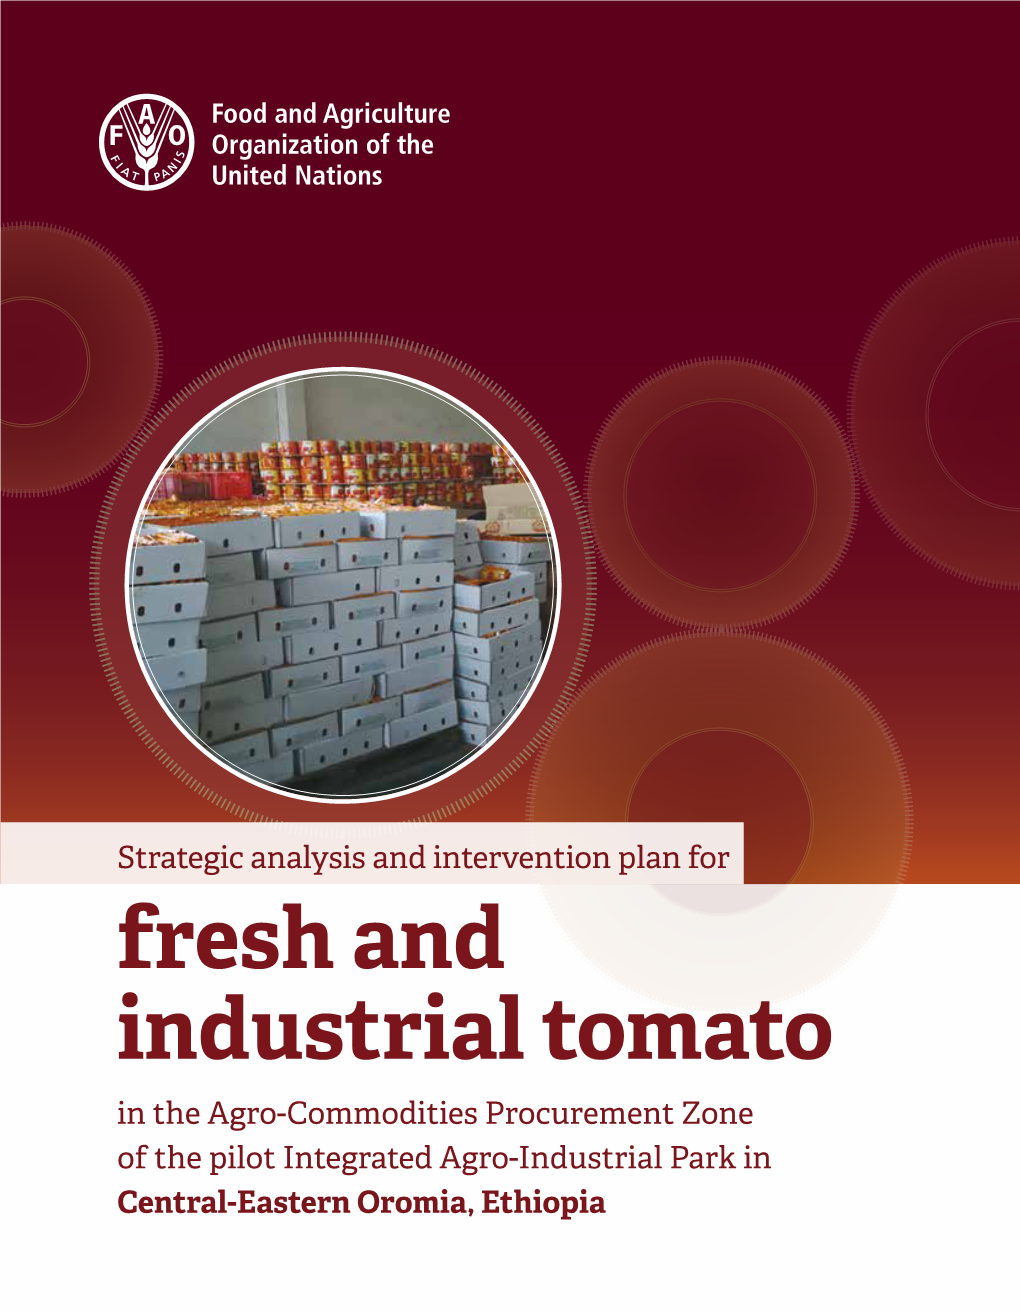 Fresh and Industrial Tomato in the Agro-Commodities Procurement Zone of the Pilot Integrated Agro-Industrial Park in Central-Eastern Oromia, Ethiopia